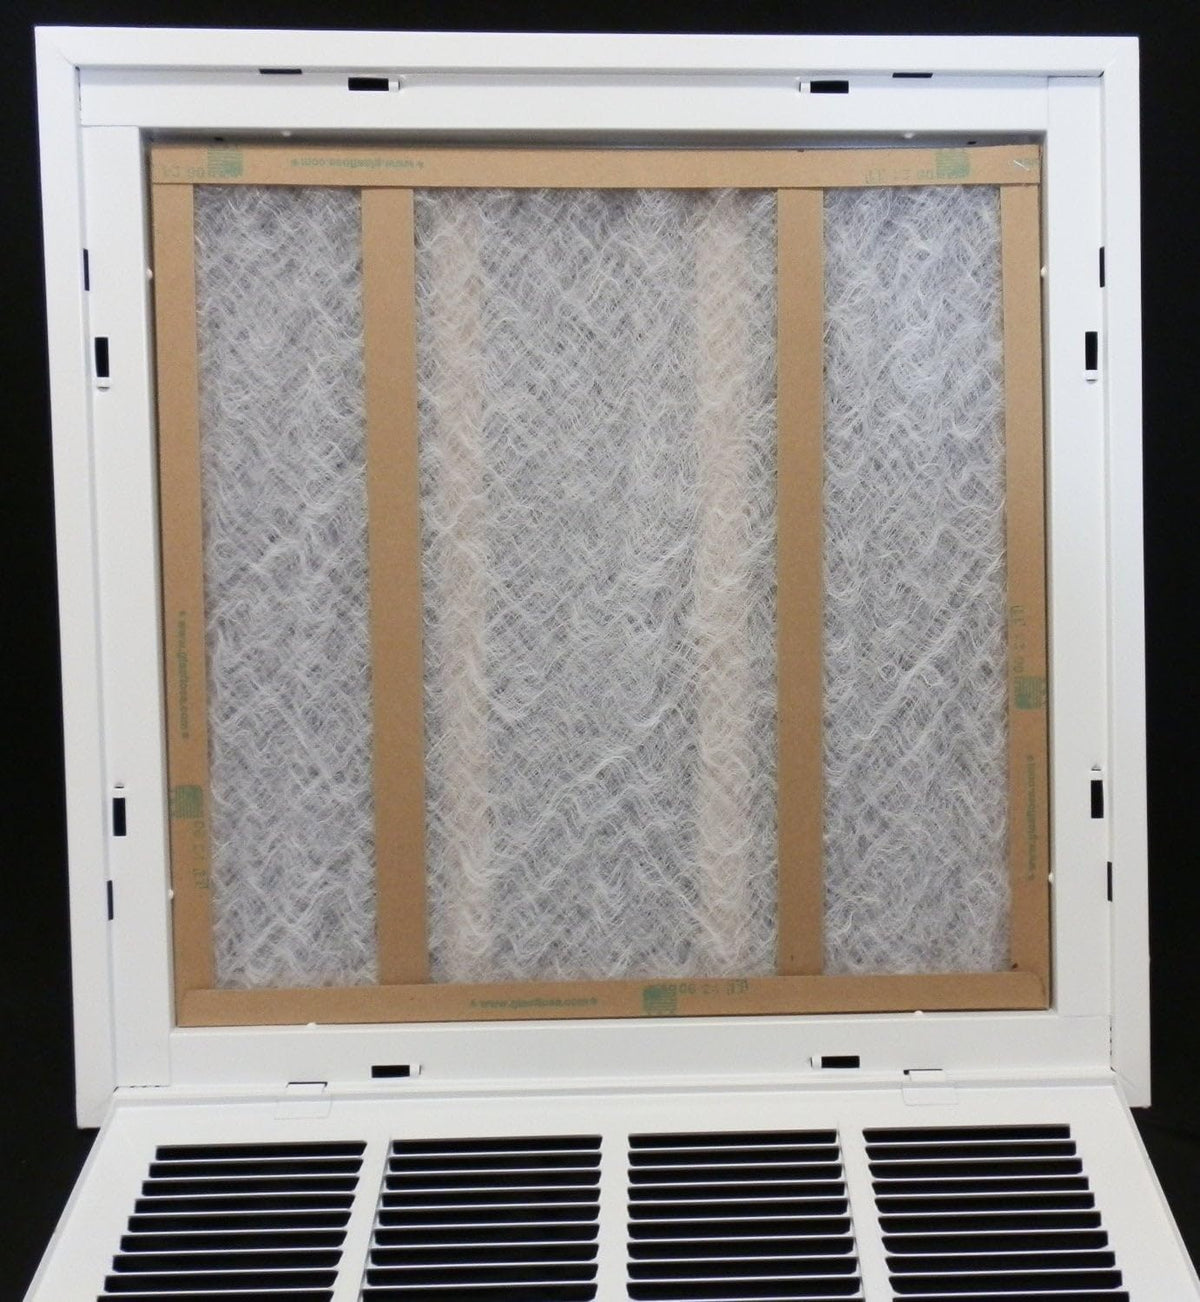 18&quot; X 25&quot; Steel Return Air Filter Grille for 1&quot; Filter - Removable Frame - [Outer Dimensions: 20 5/8&quot; X 27 5/8&quot;]